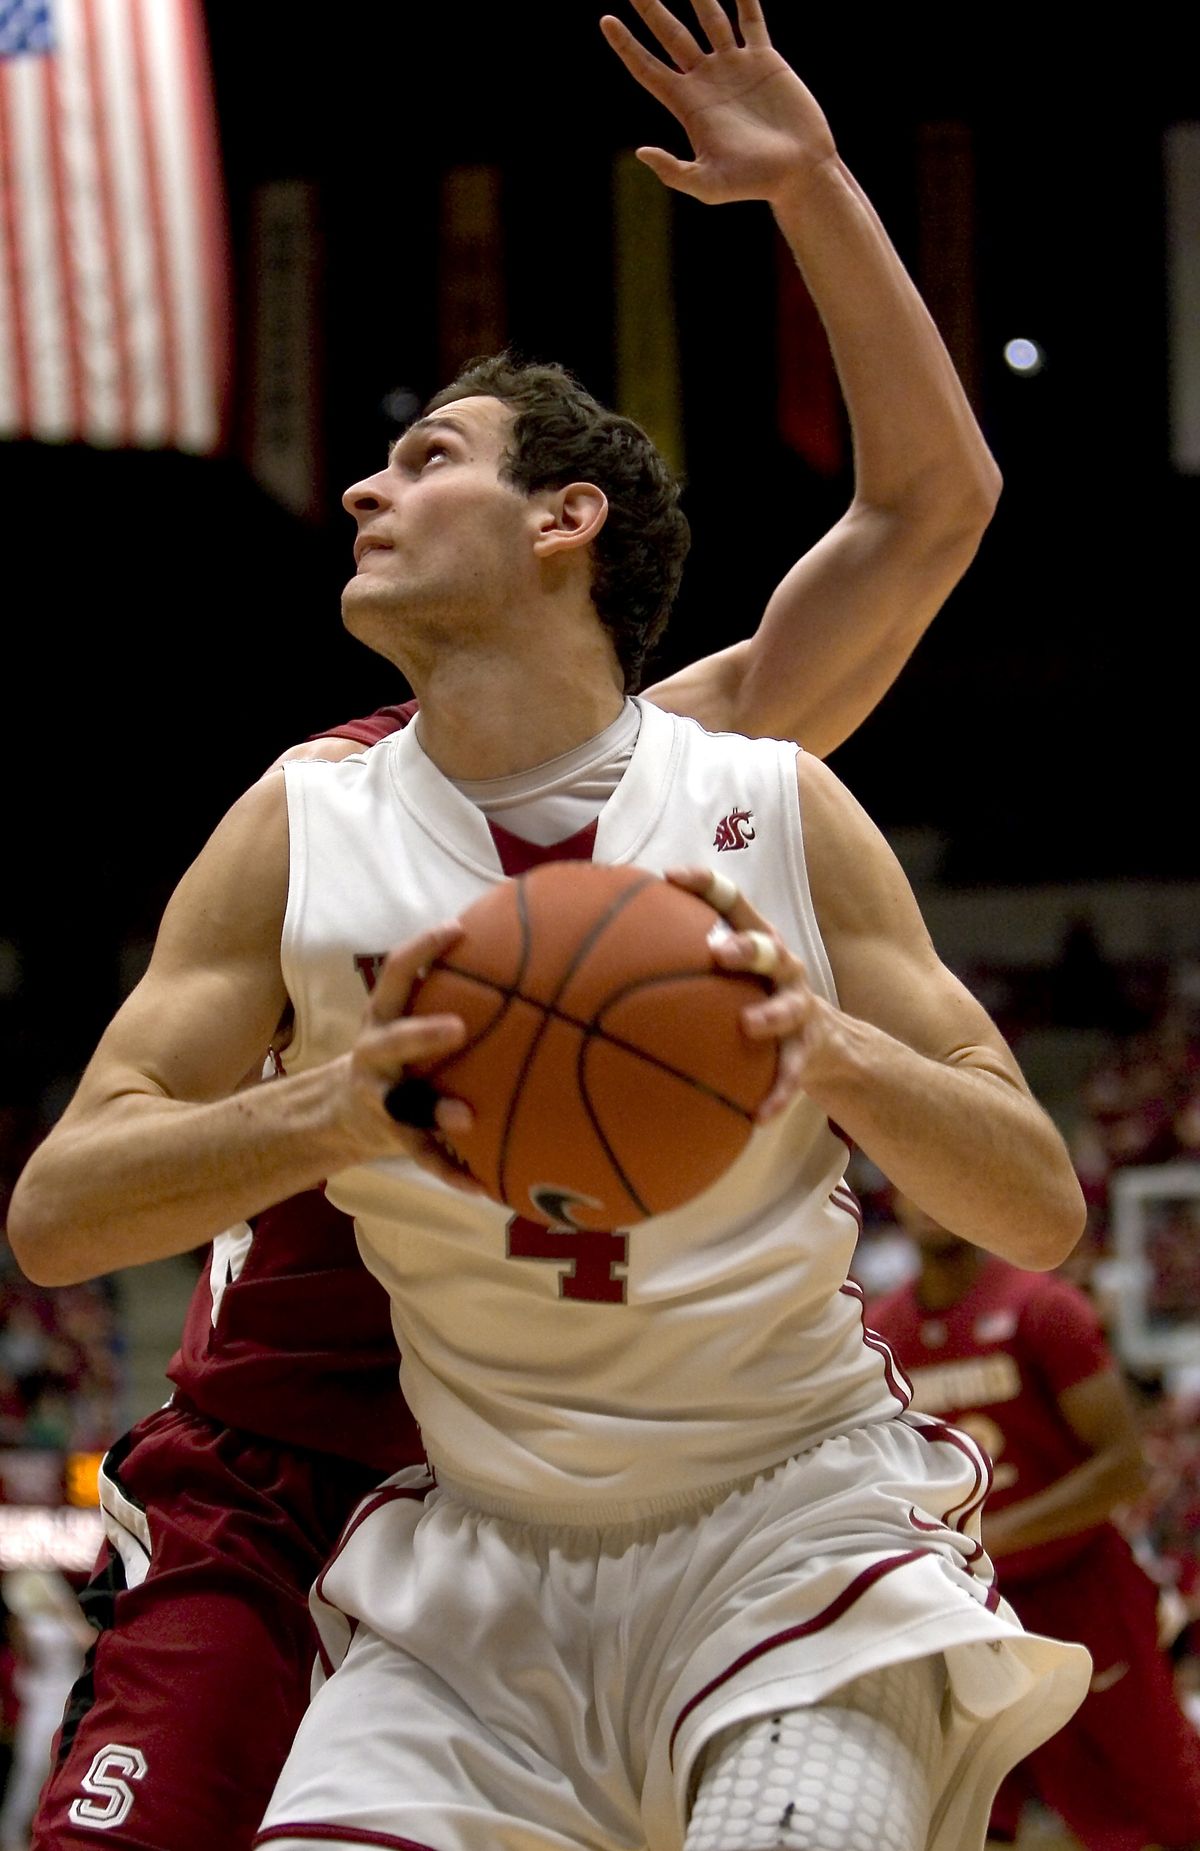 Washington State guard Nikola Koprivica, front, prepares to goes up for a layup during the second half of an NCAA college basketball game Saturday, Jan. 16, 2010, against Stanford at Beasley Coliseum in Pullman. Washington State won 77-73. (Dean Hare / Associated Press)